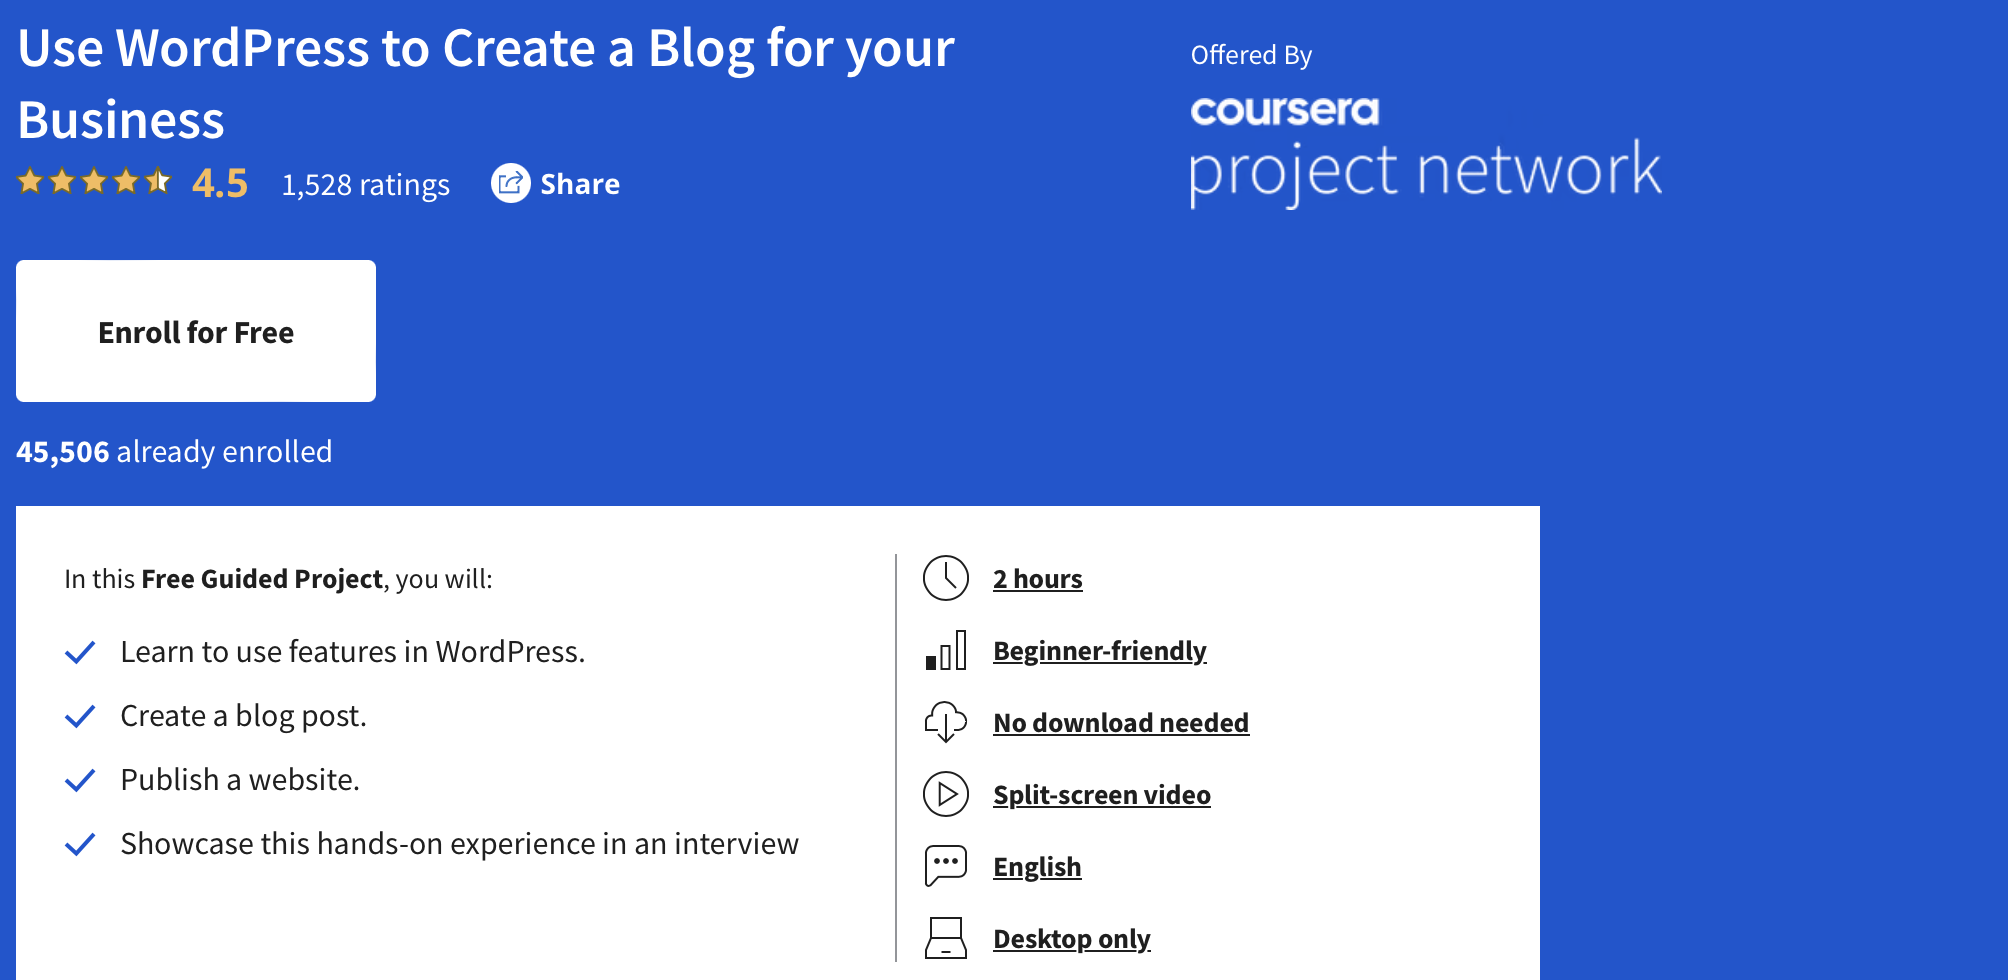 Use WordPress to Create a Blog for Your Business  - Coursera